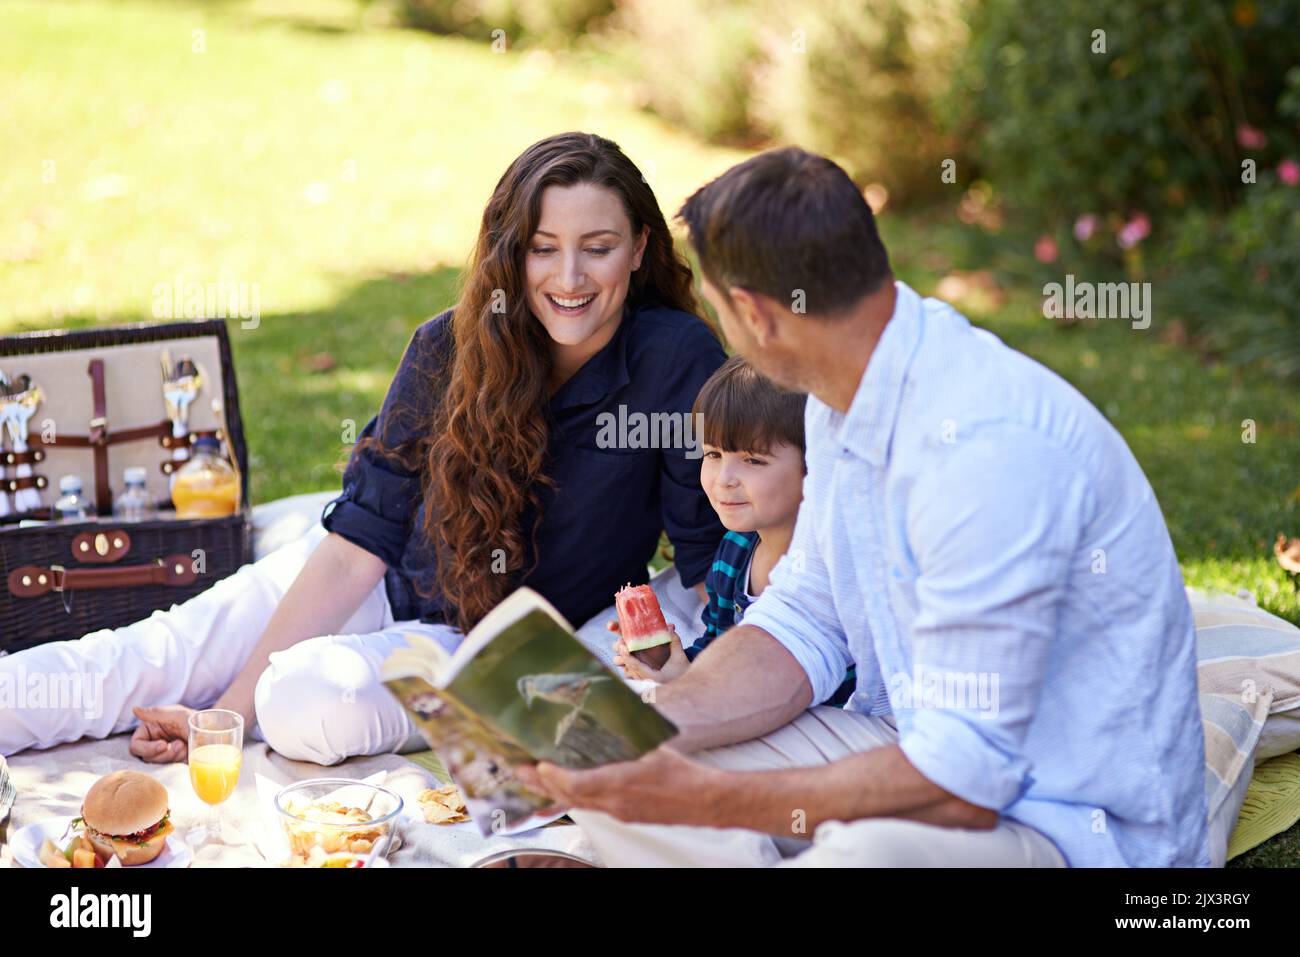 The perfect day for a picnic. a family enjoying a picnic together. Stock Photo